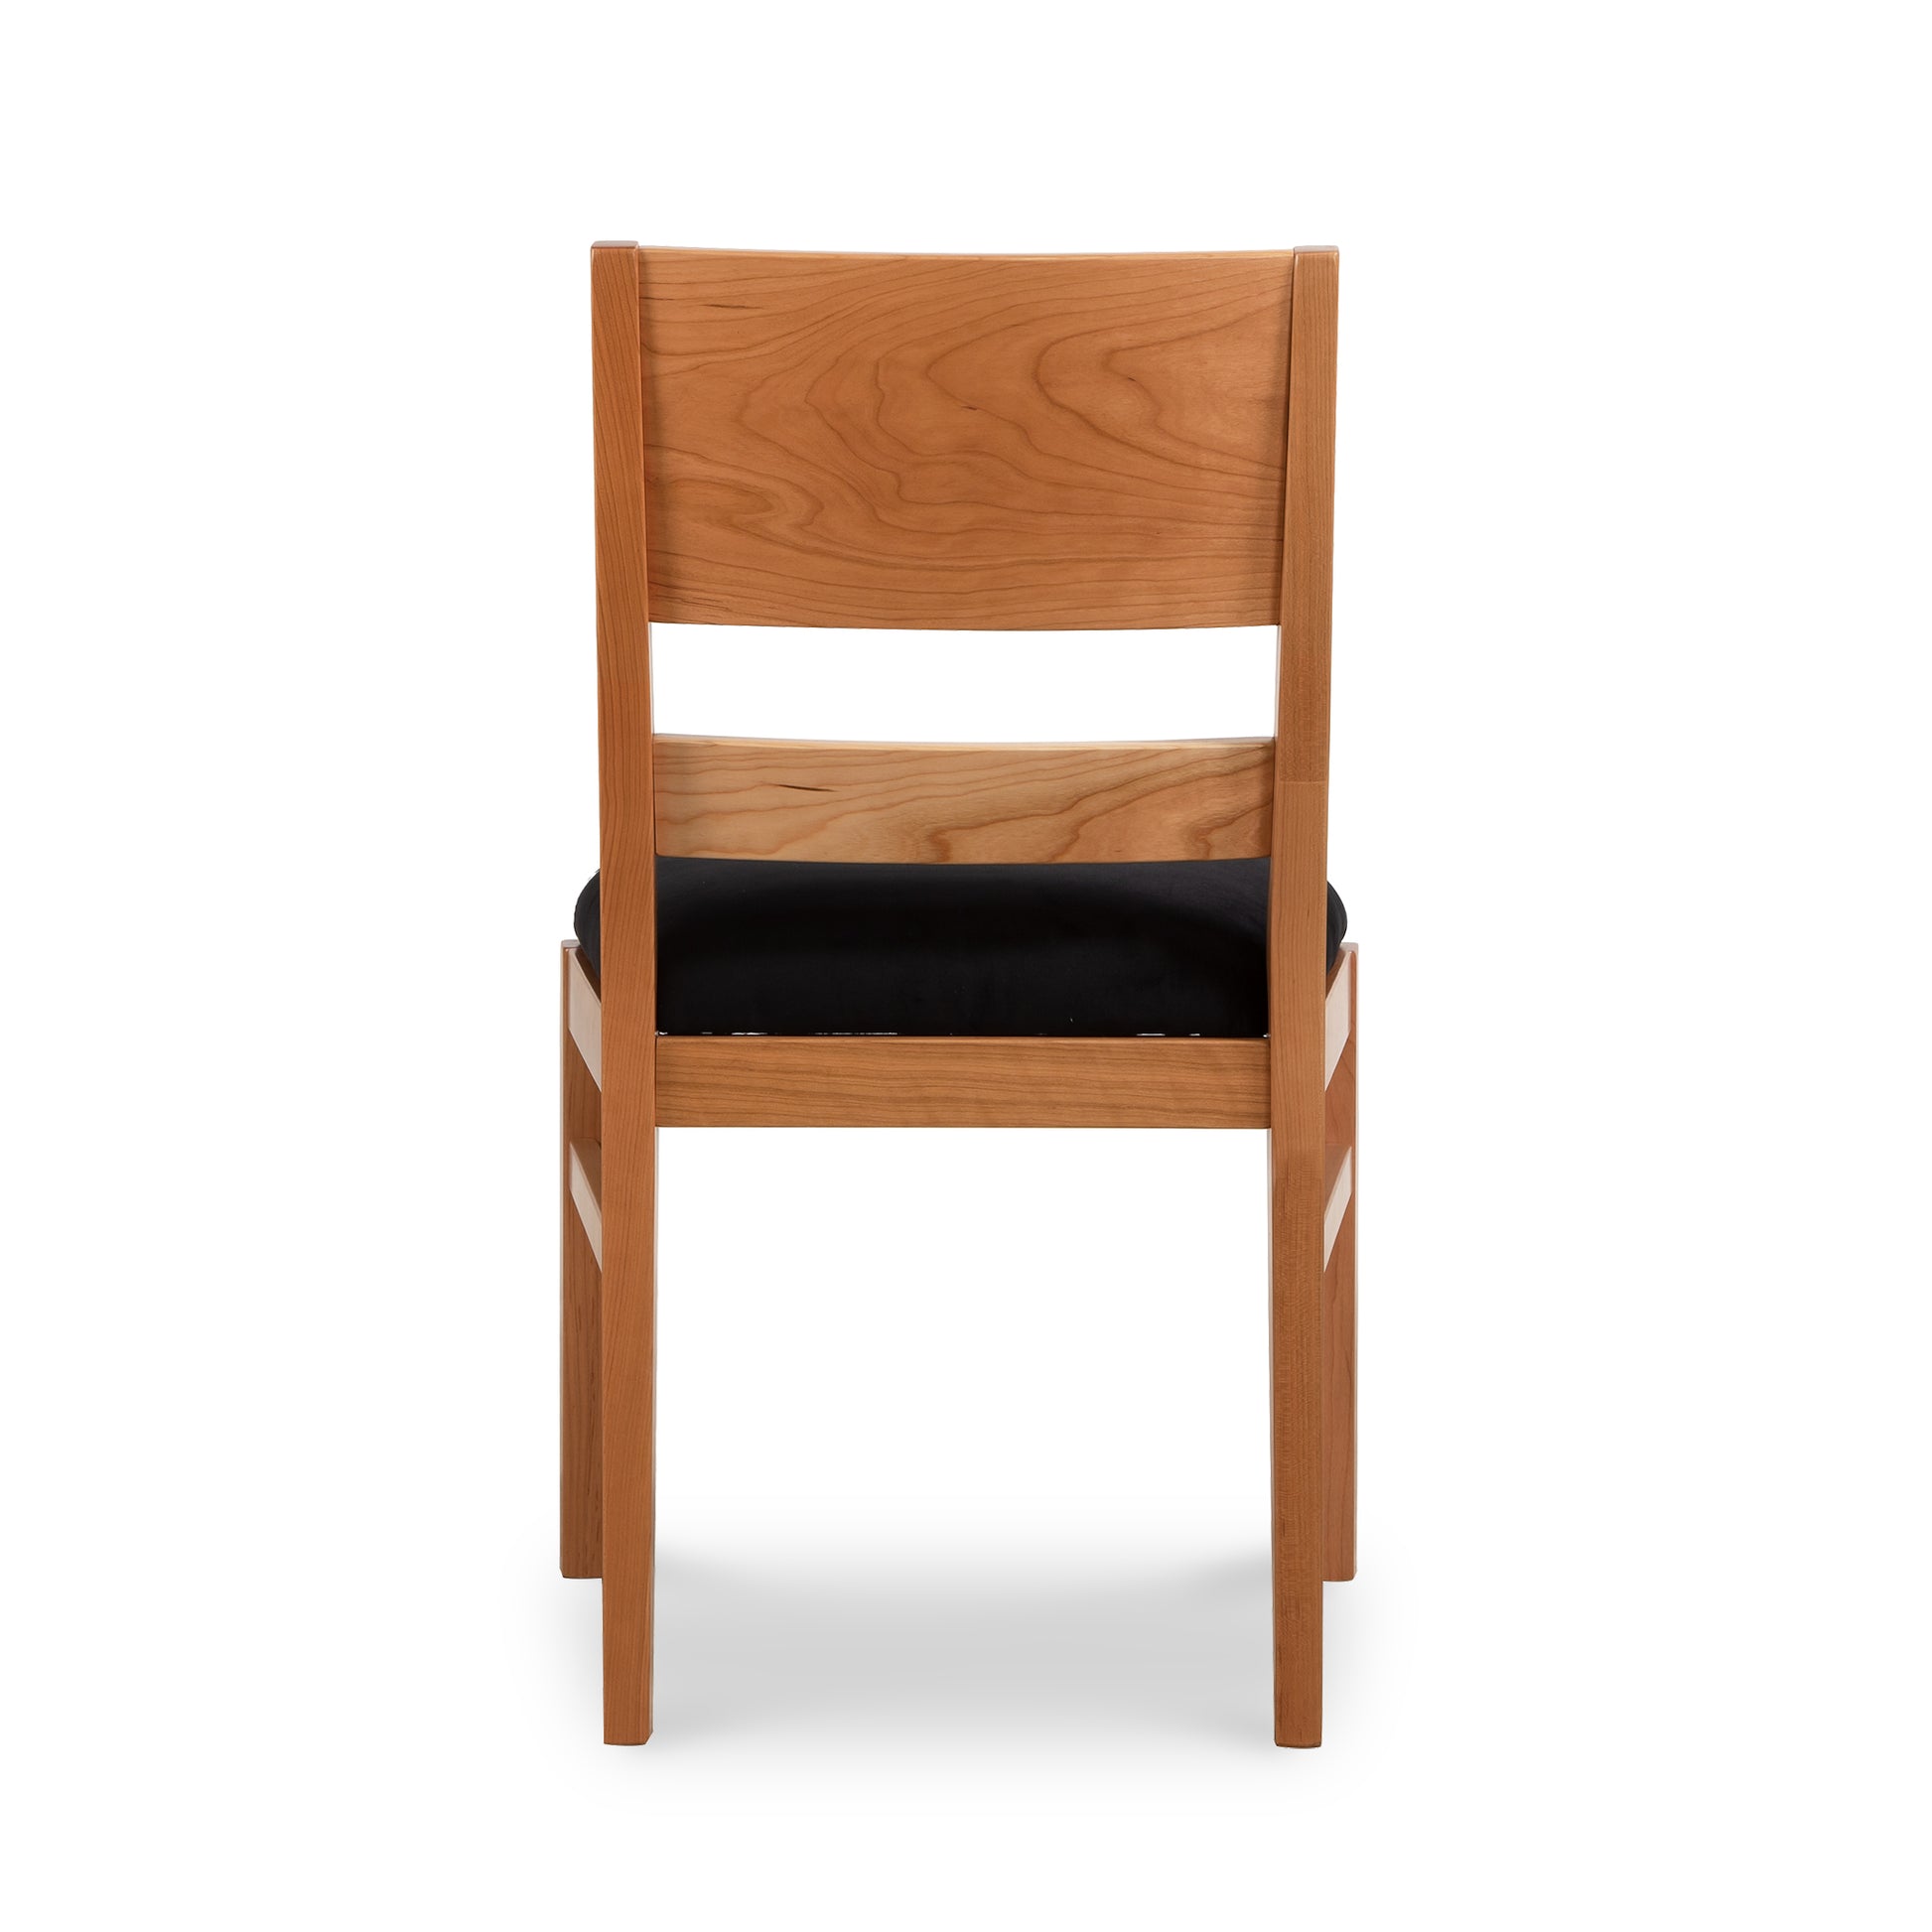 Vermont Woods Studios Burke Modern Chair with a black cushion, viewed from the back, against a white background.